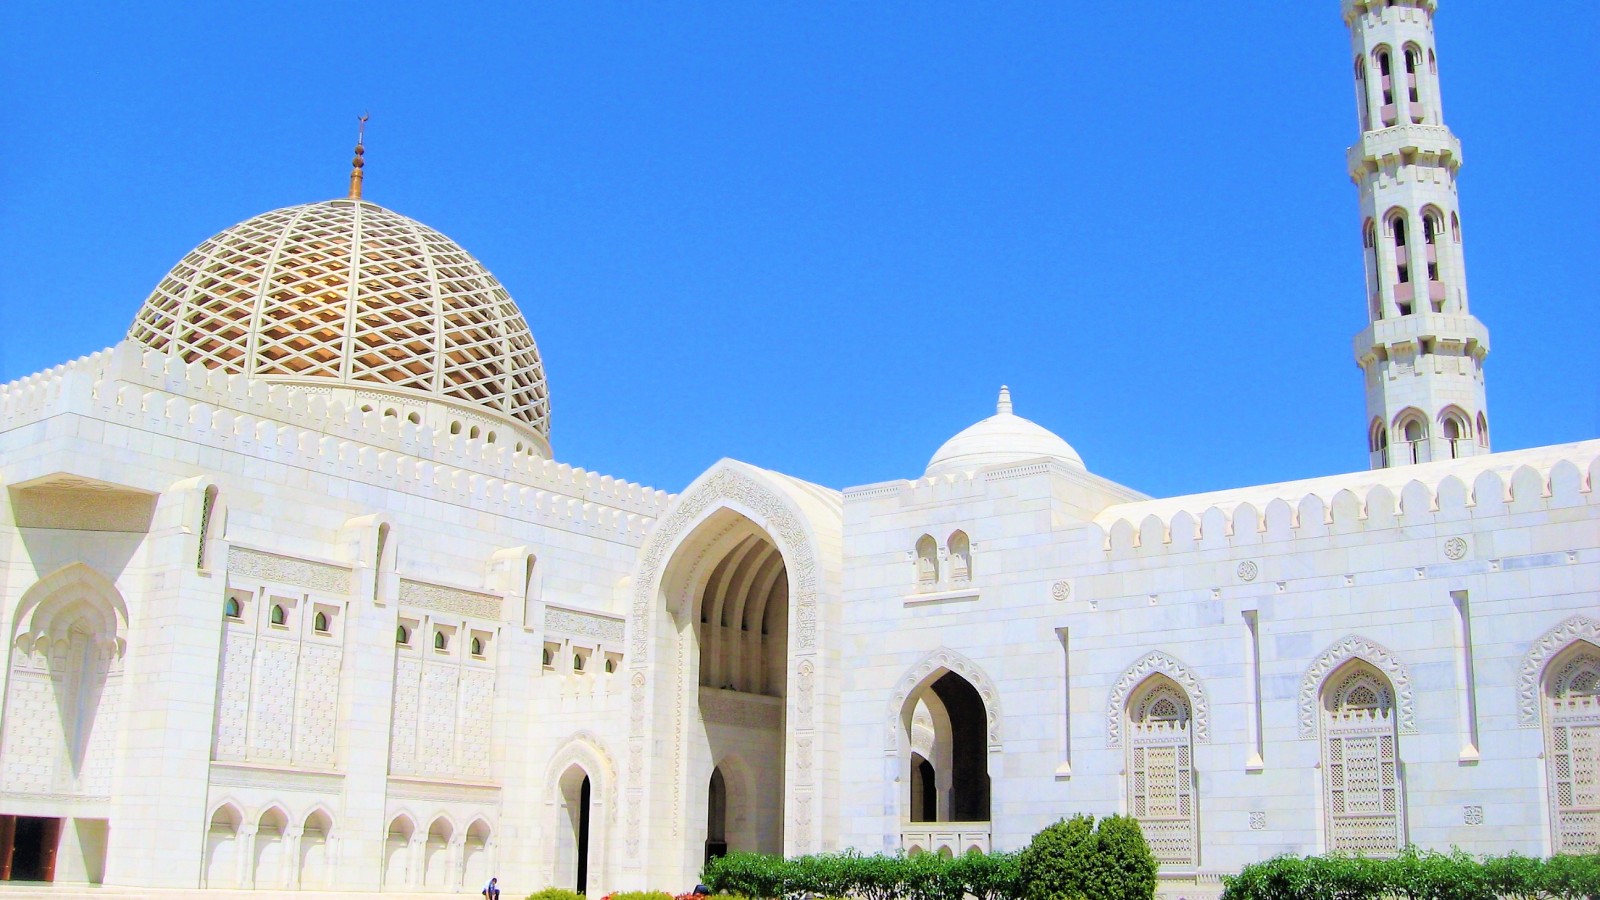 The Sultan Qaboos Grand Mosque is the main mosque in the Sultanate of Oman